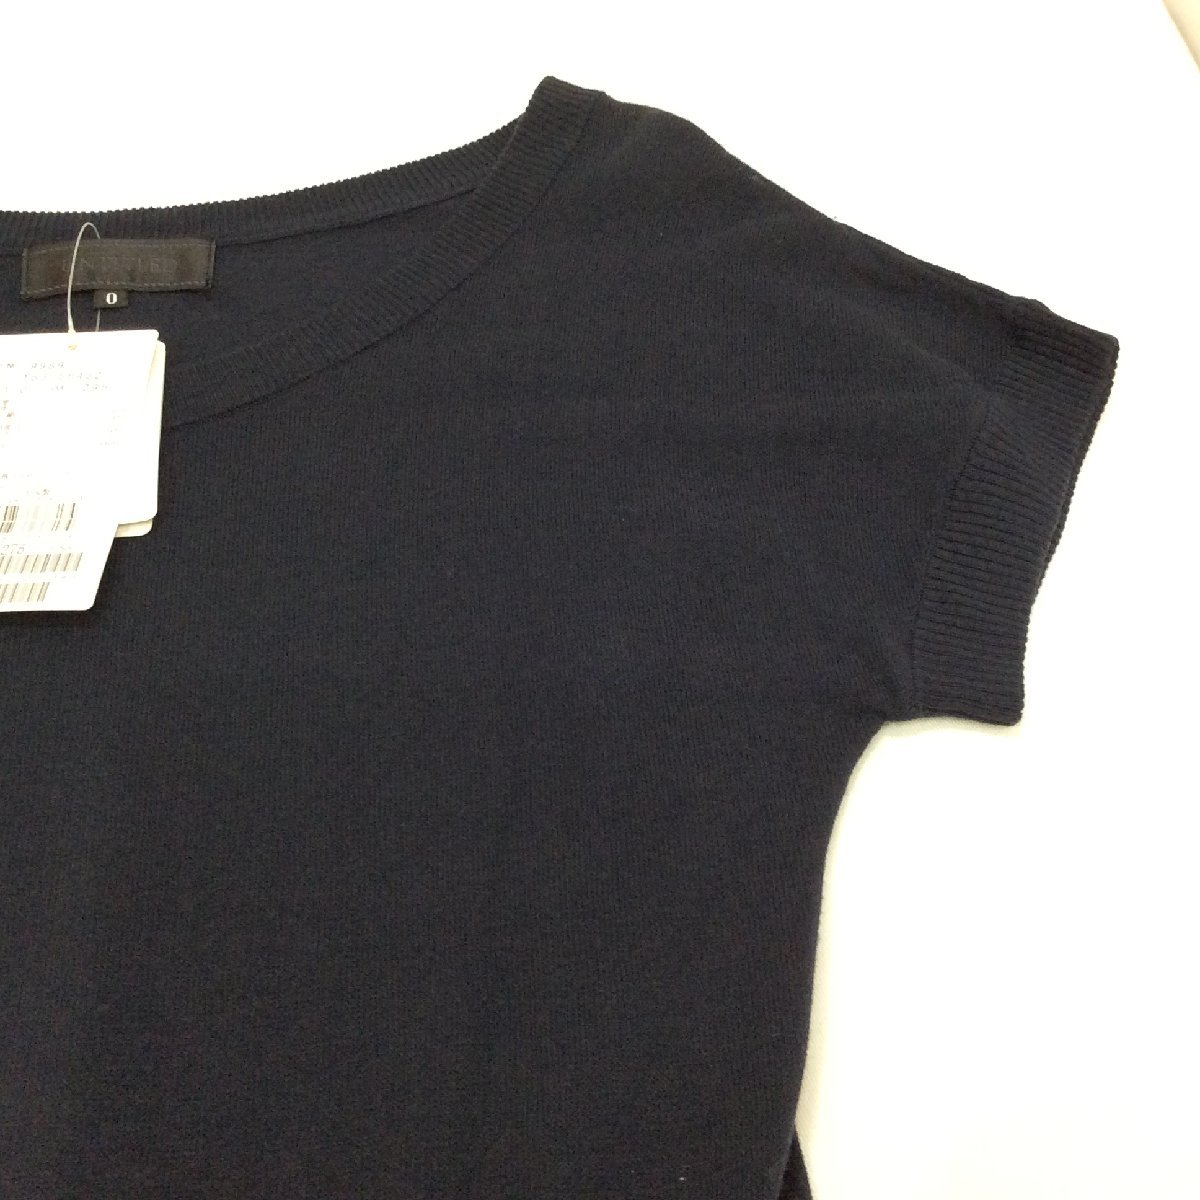  unused *UNTITLED Untitled lady's One-piece 0 navy × gray 